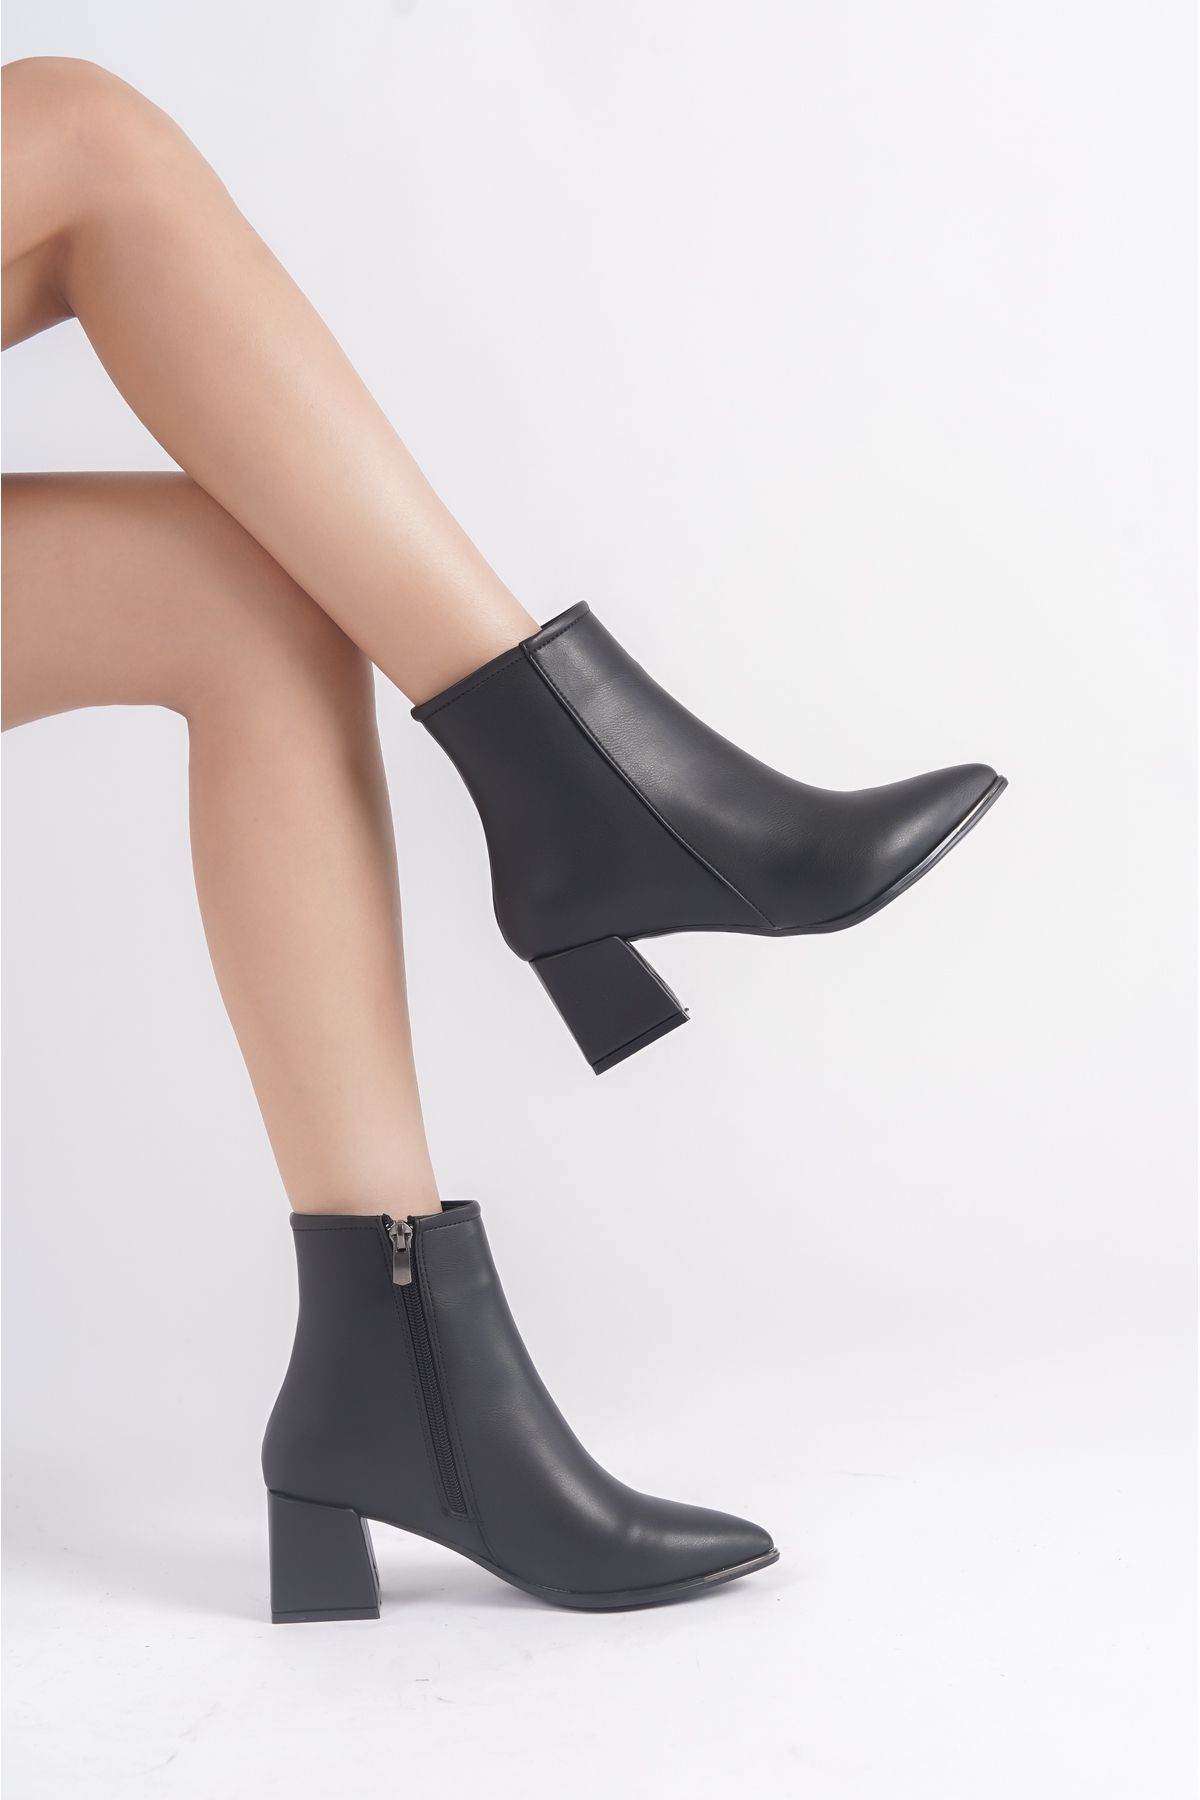 Shop Womens Flat Boots Online, Buy Womens Low Heel Boots – Brand House  Direct